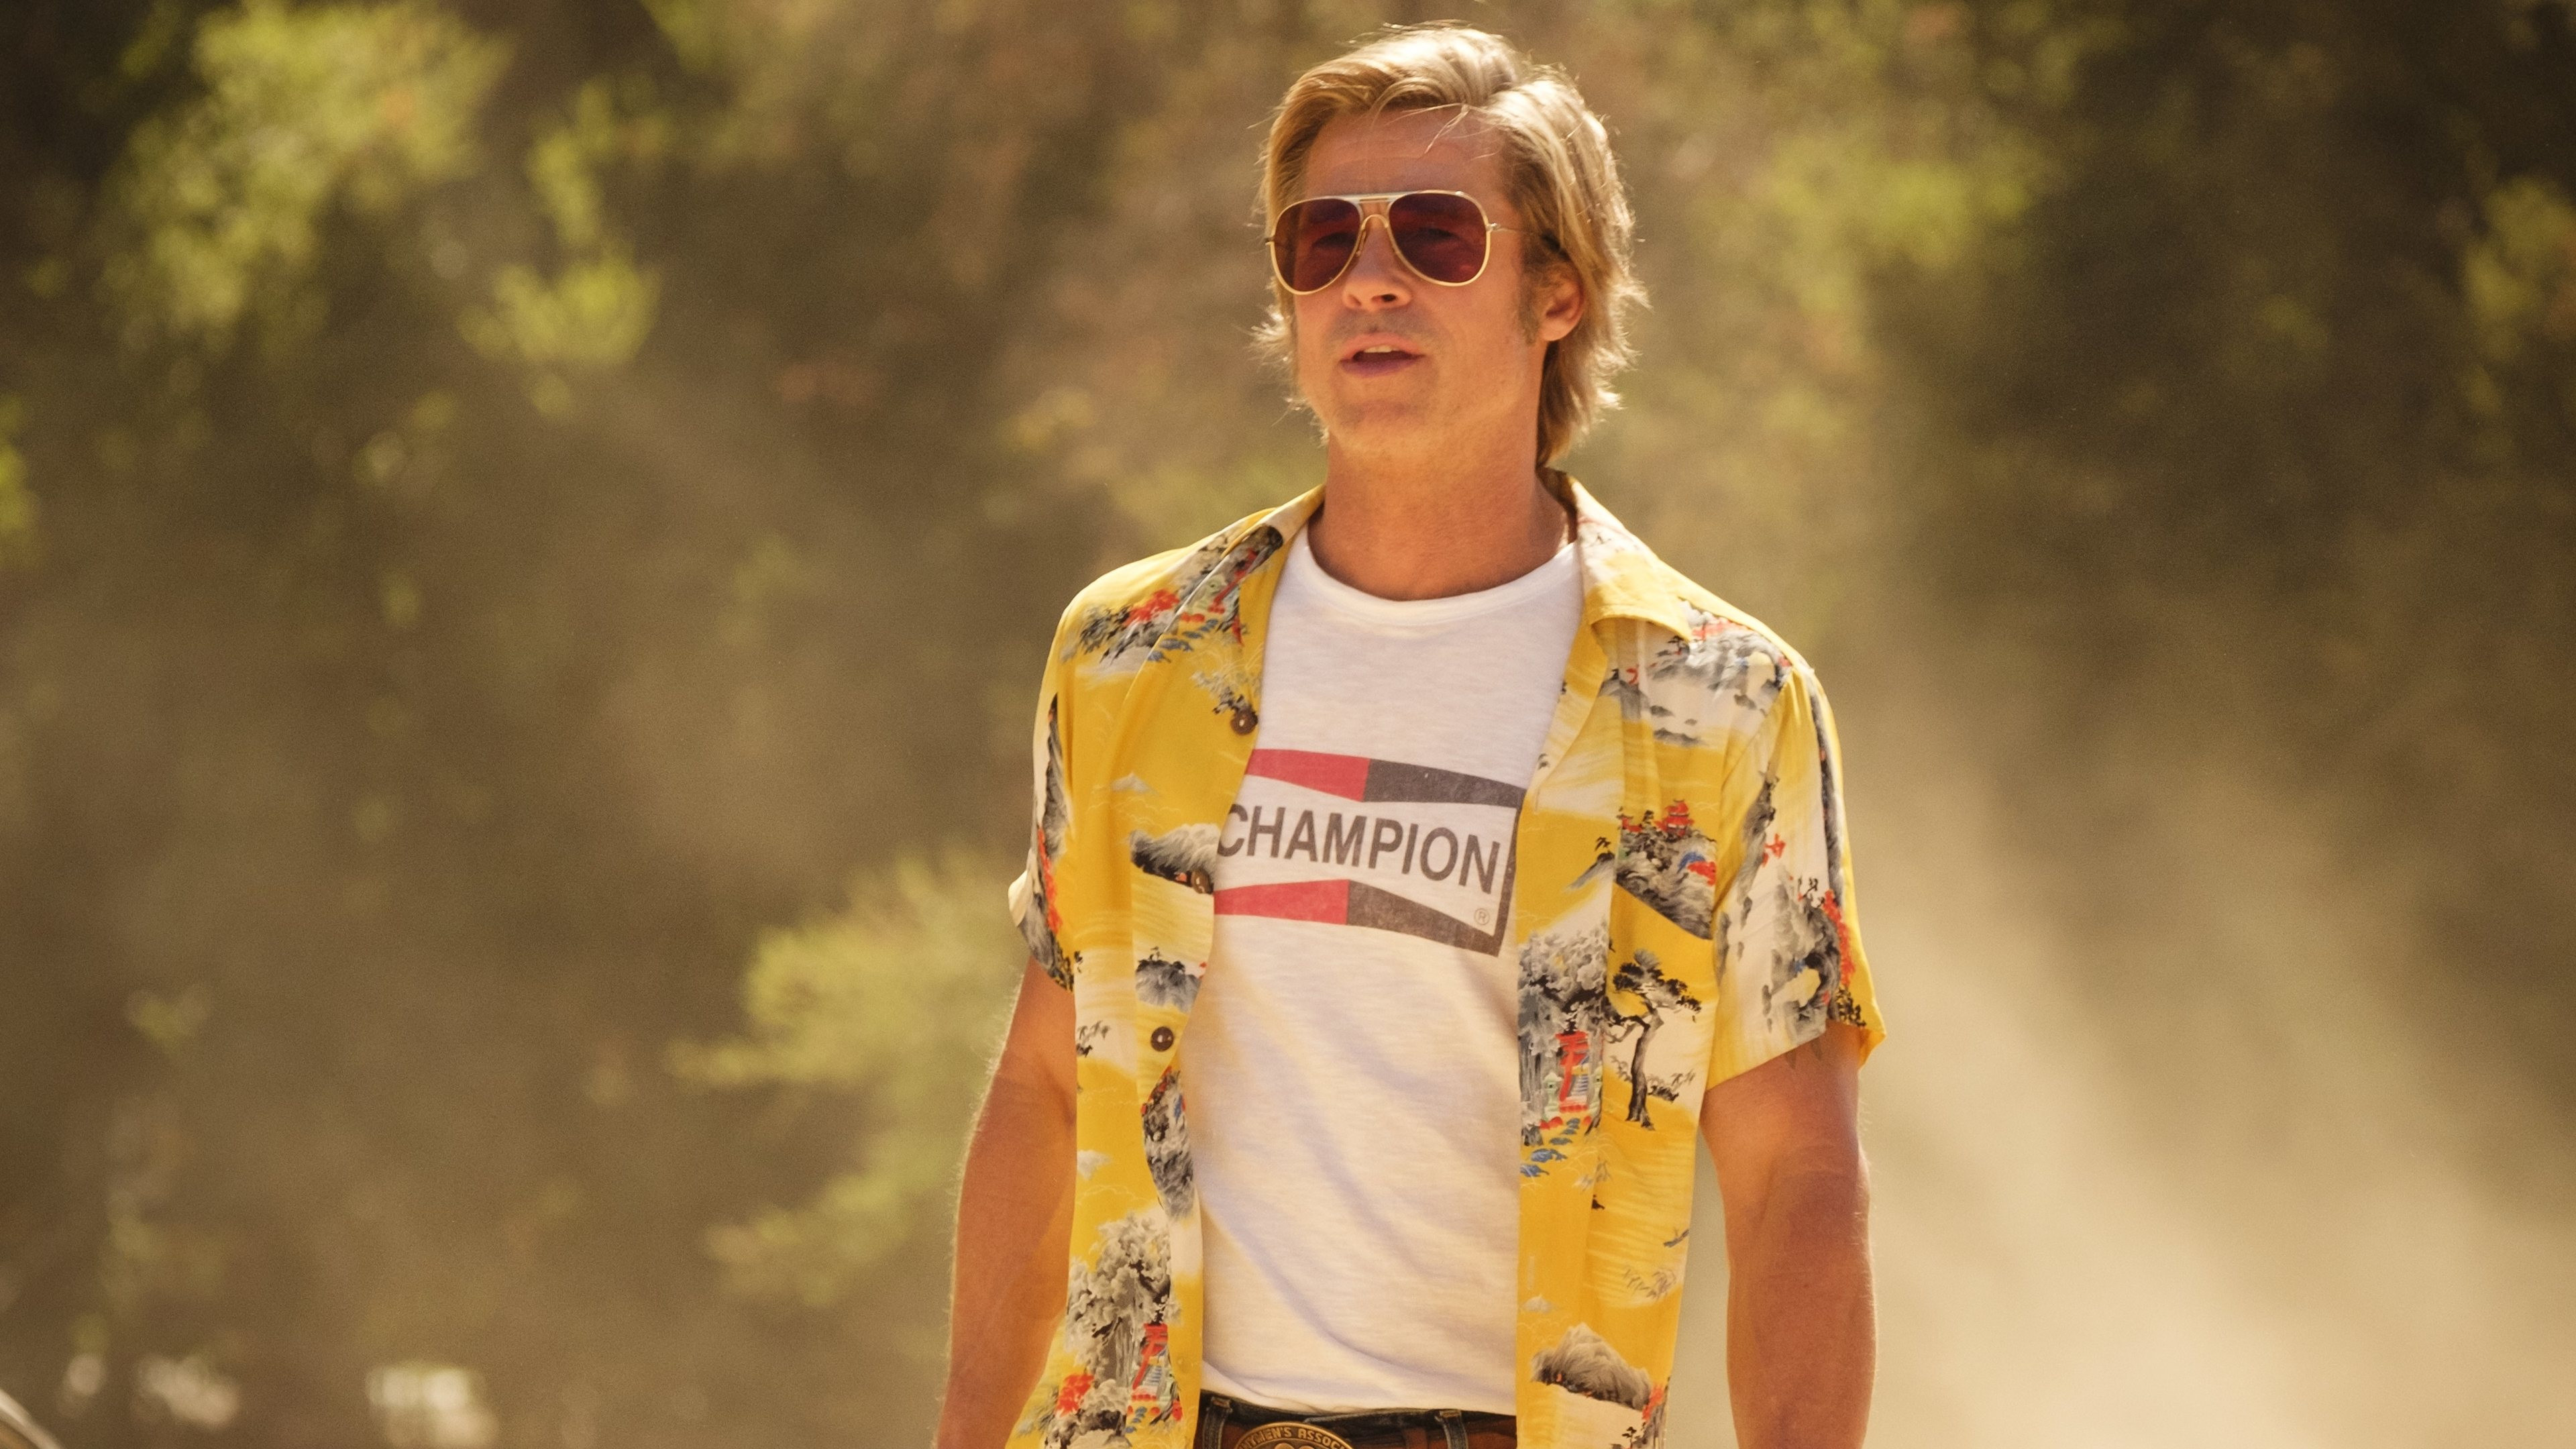 Brad Pitt: Cliff Booth, One of the greatest Quentin Tarantino's characters. 3840x2160 4K Wallpaper.